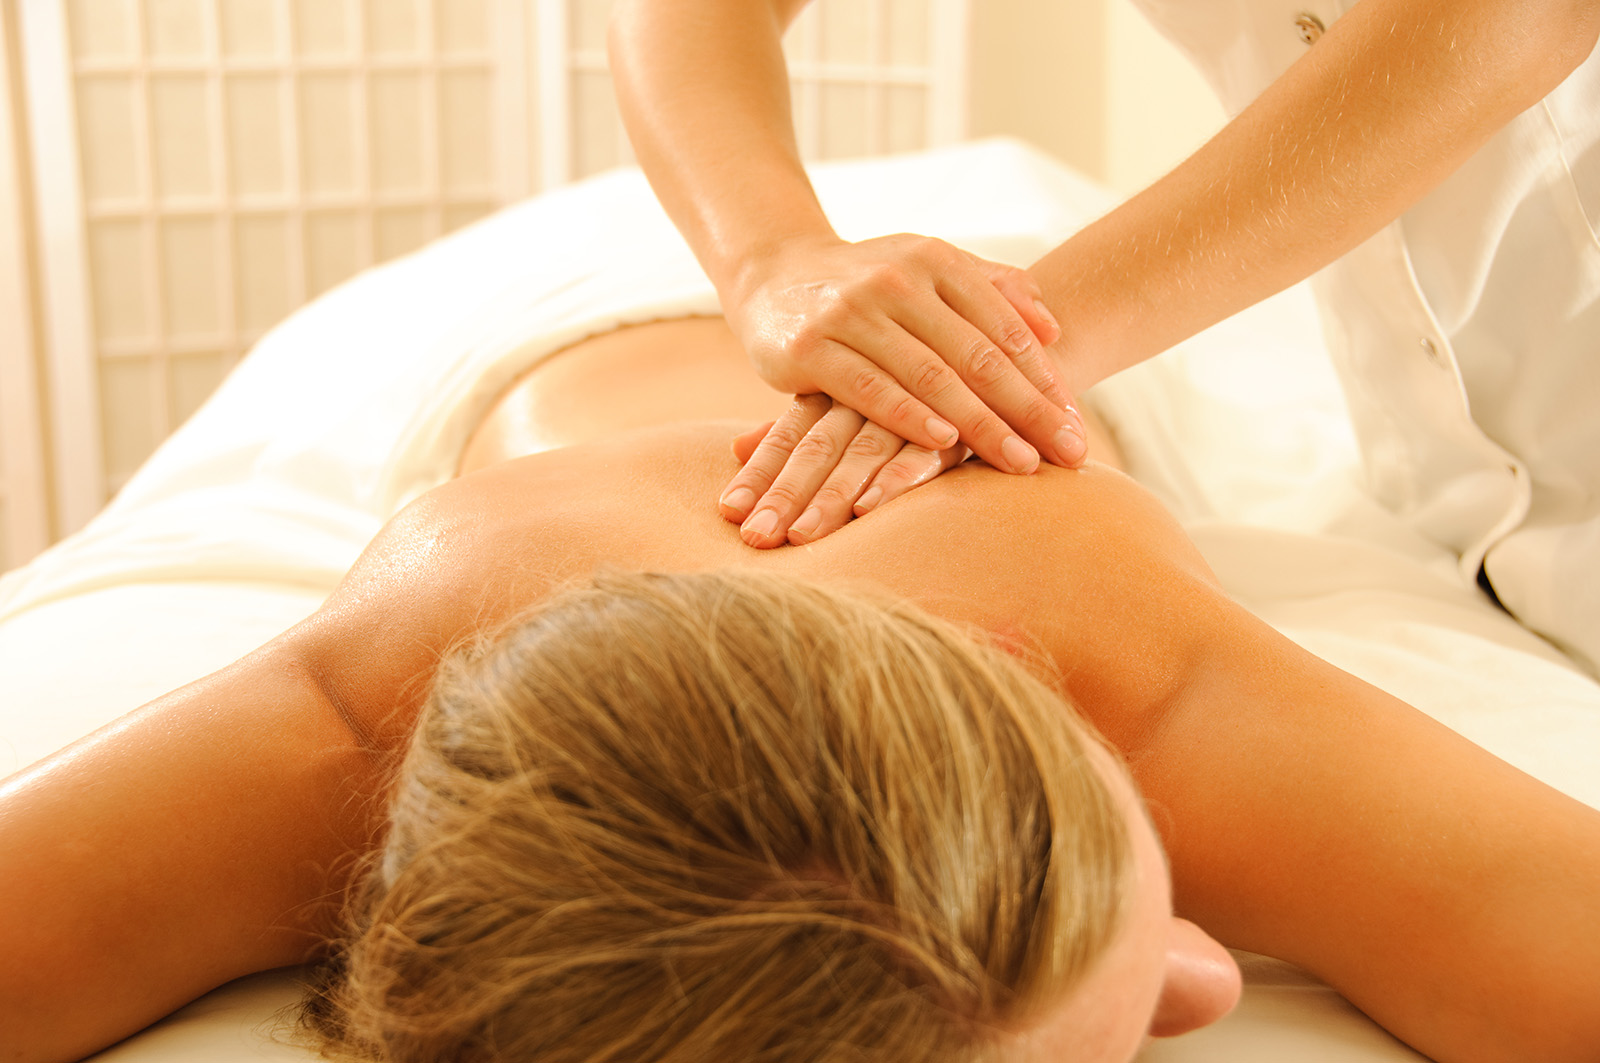 What to expect during a massage with me….